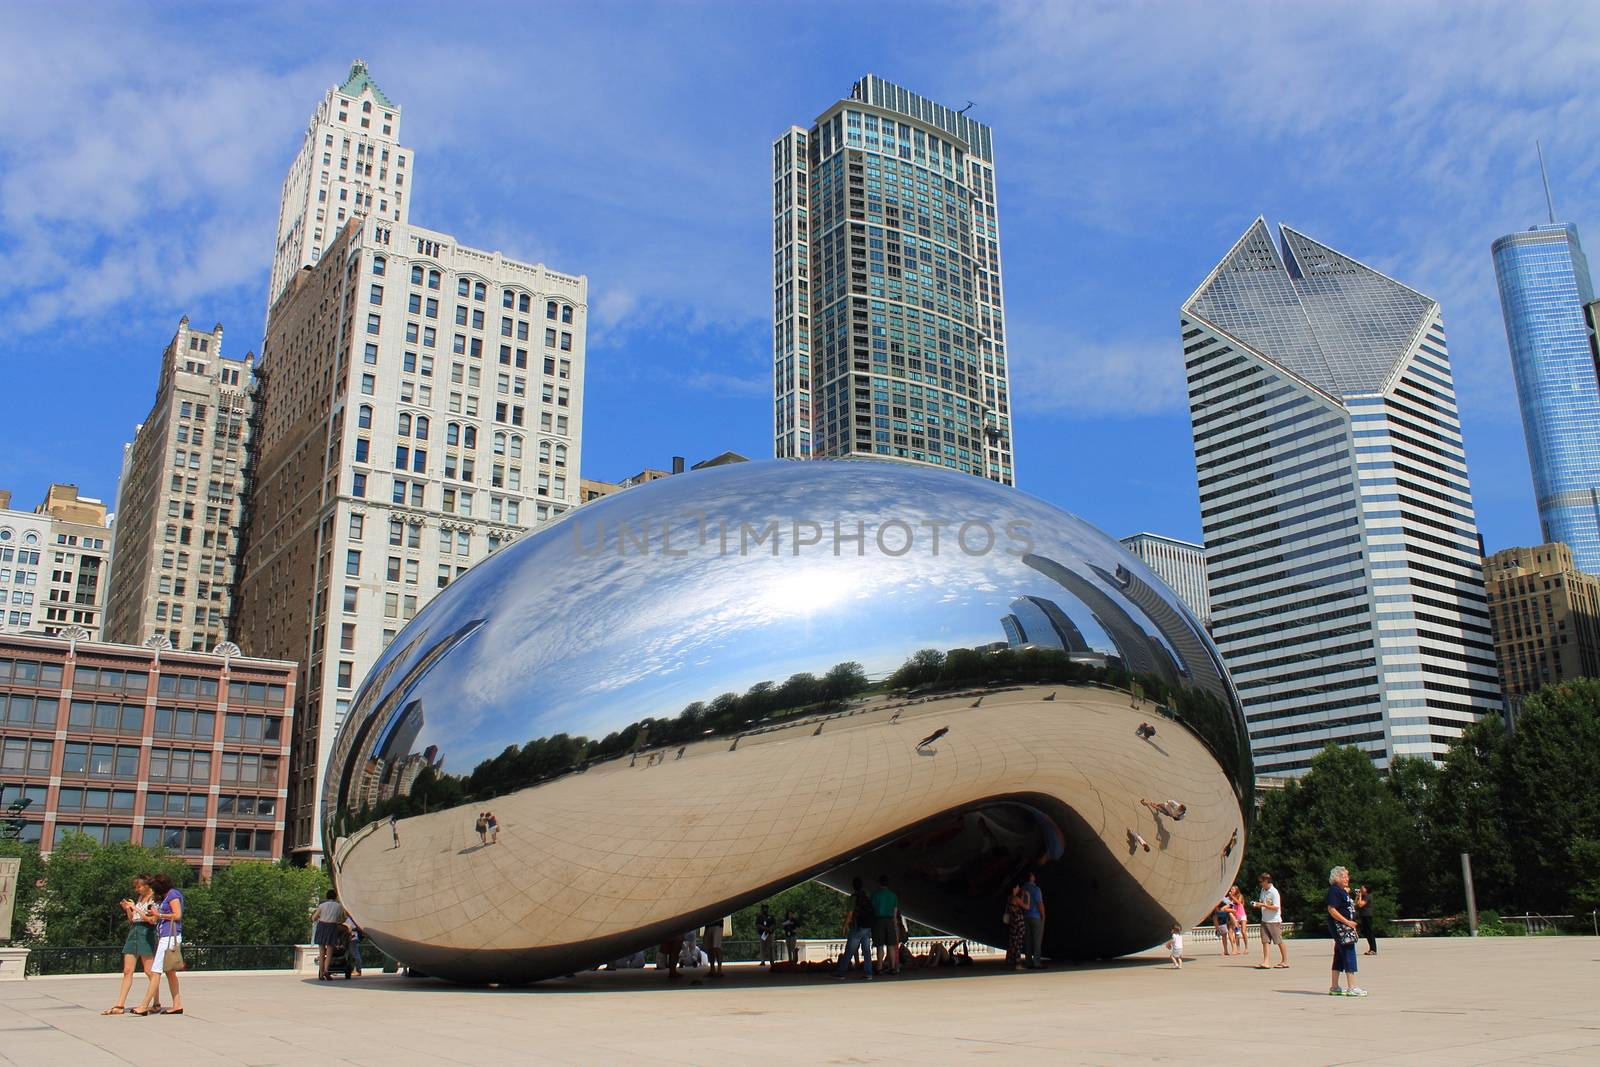 Chicago - Cloud Gate sculpture by Ffooter